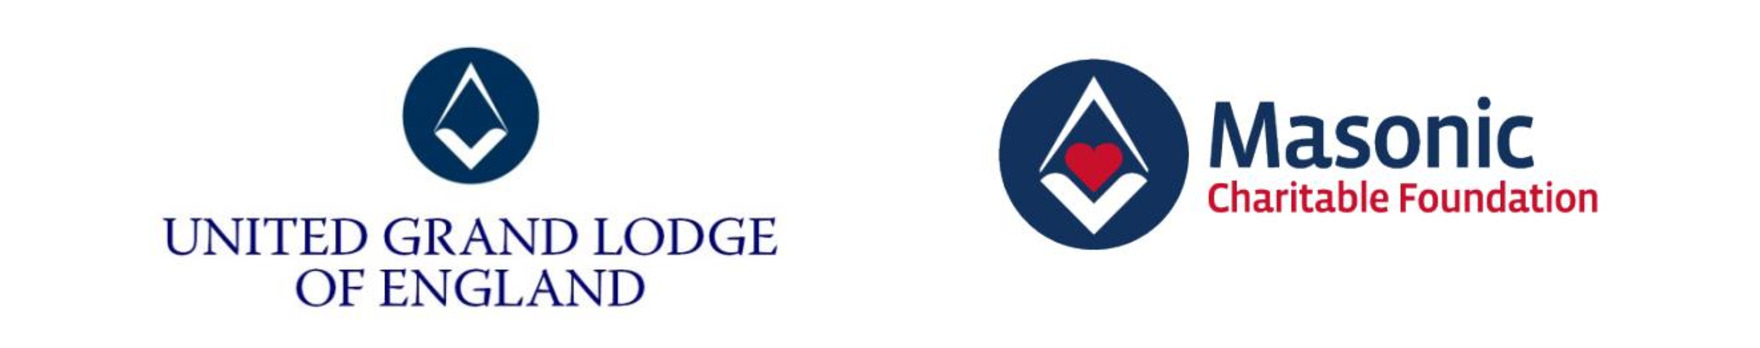 UNITED GRAND LODGE OF ENGLAND AND MASONIC CHARITABLE FOUNDATION JOINT STATEMENT